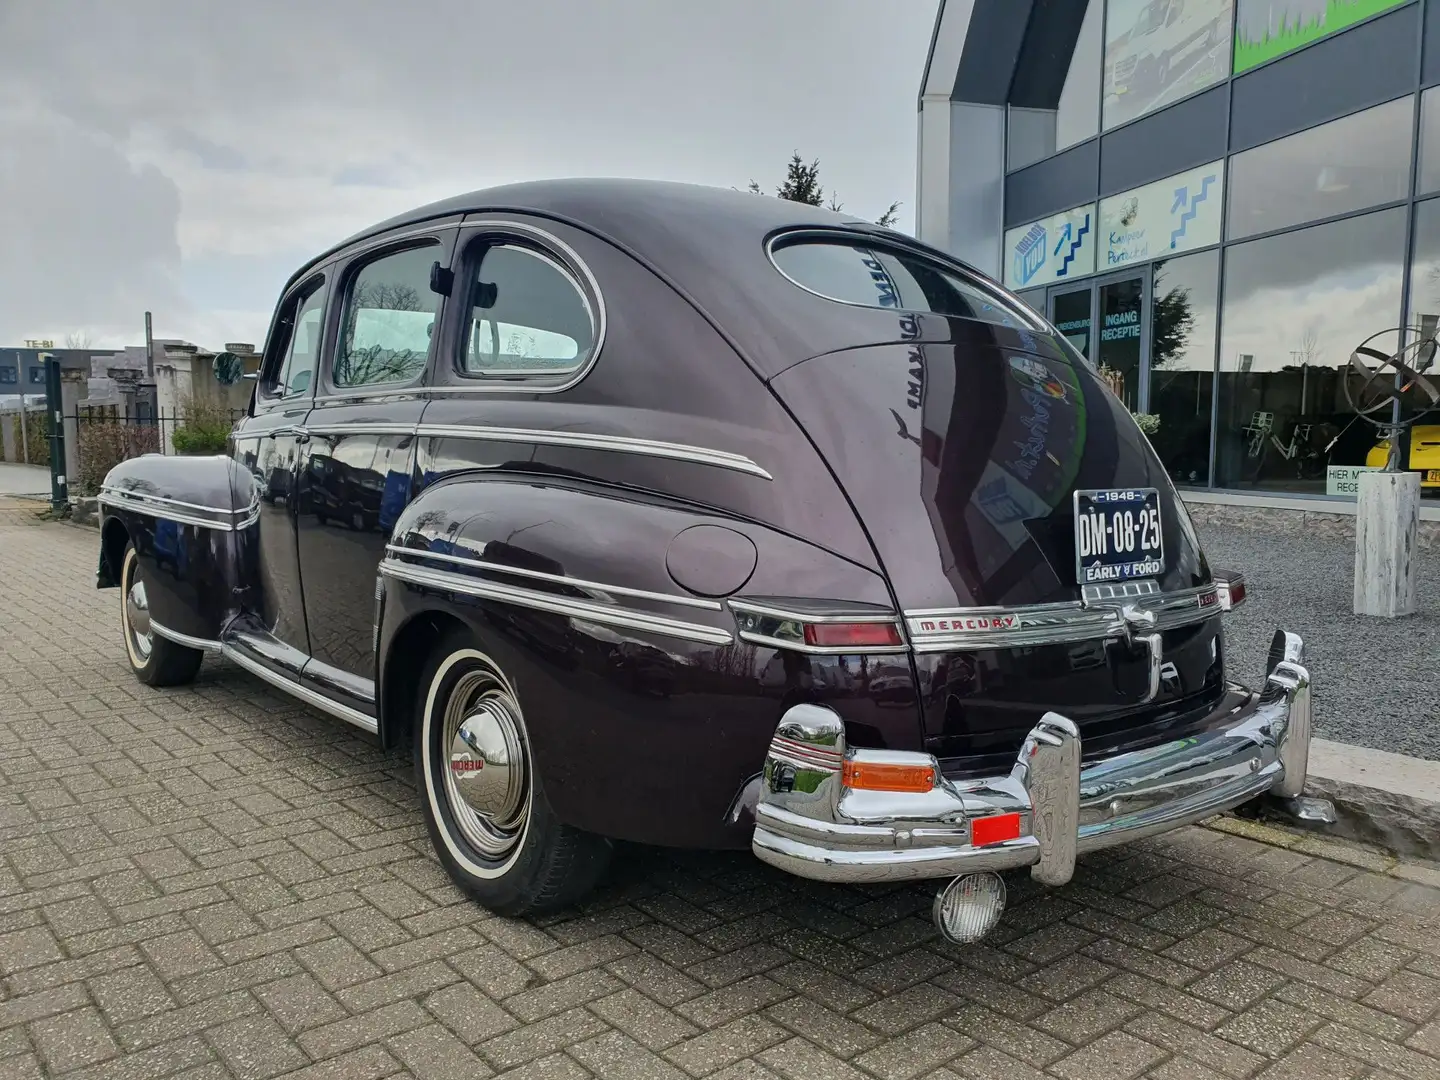 Ford Mercury 1948 Eight V8 Paars - 2